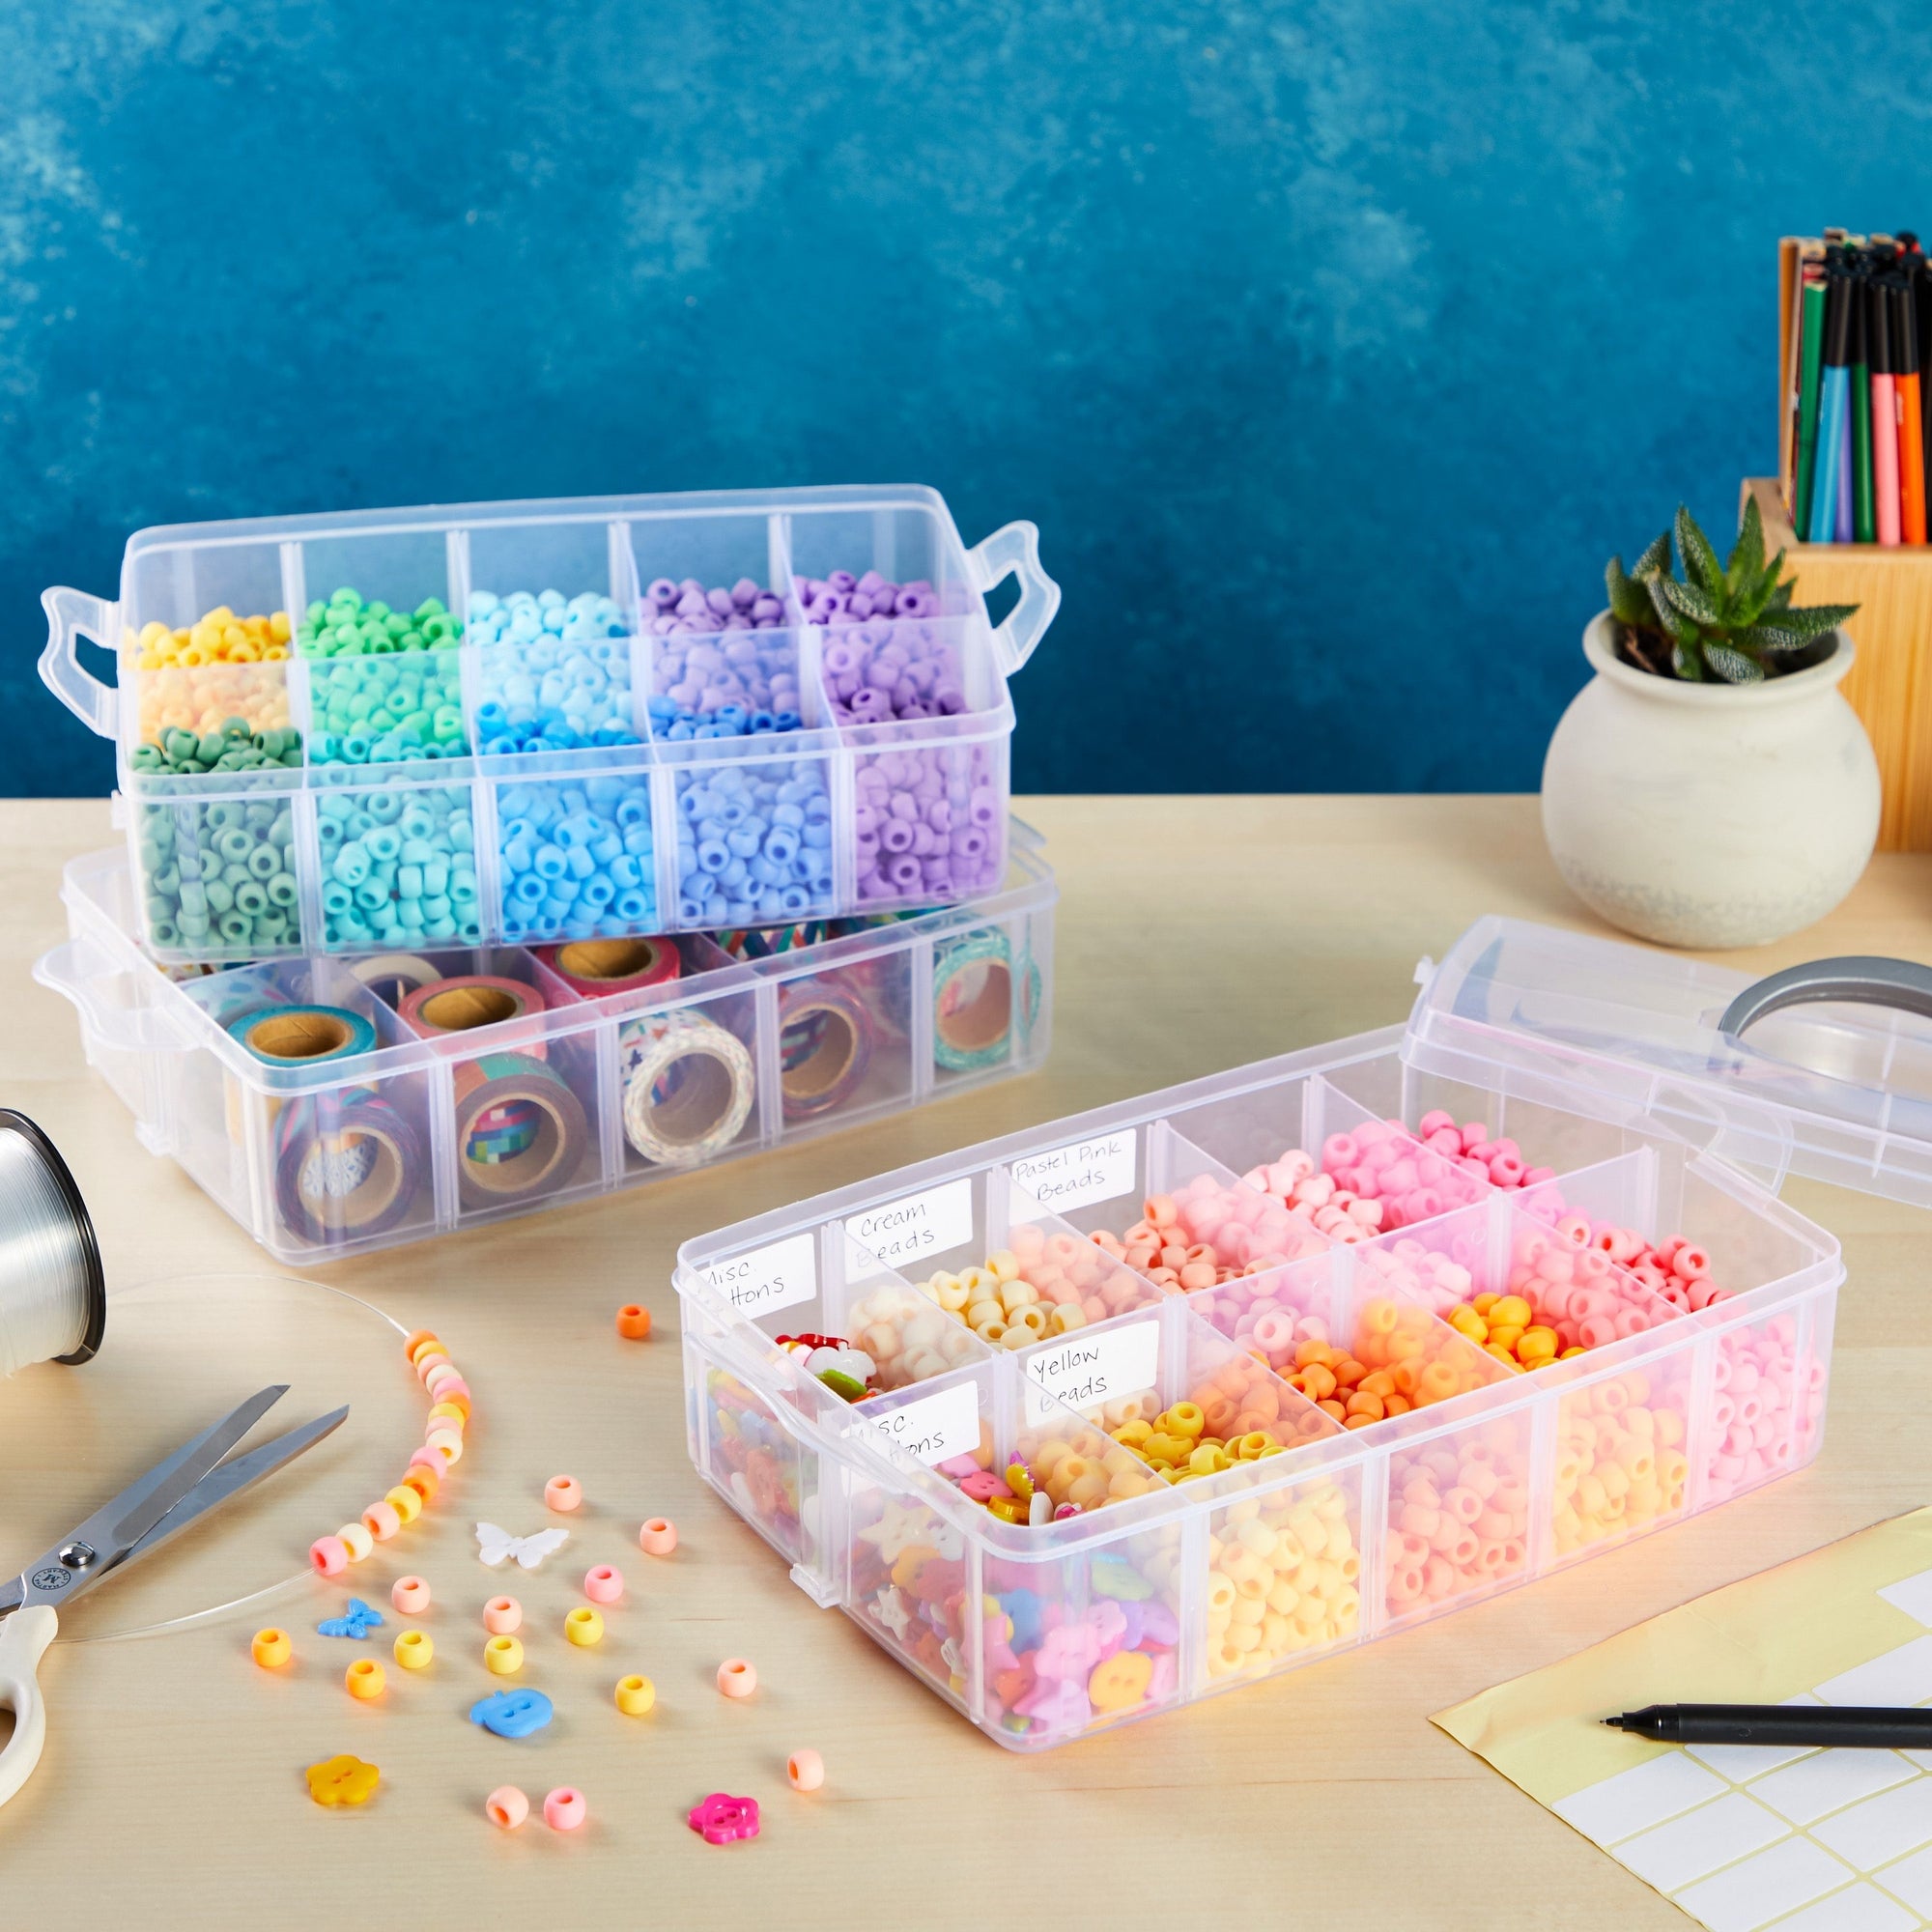 3-Tier Plastic Craft Storage Containers with 30 Compartments, 40